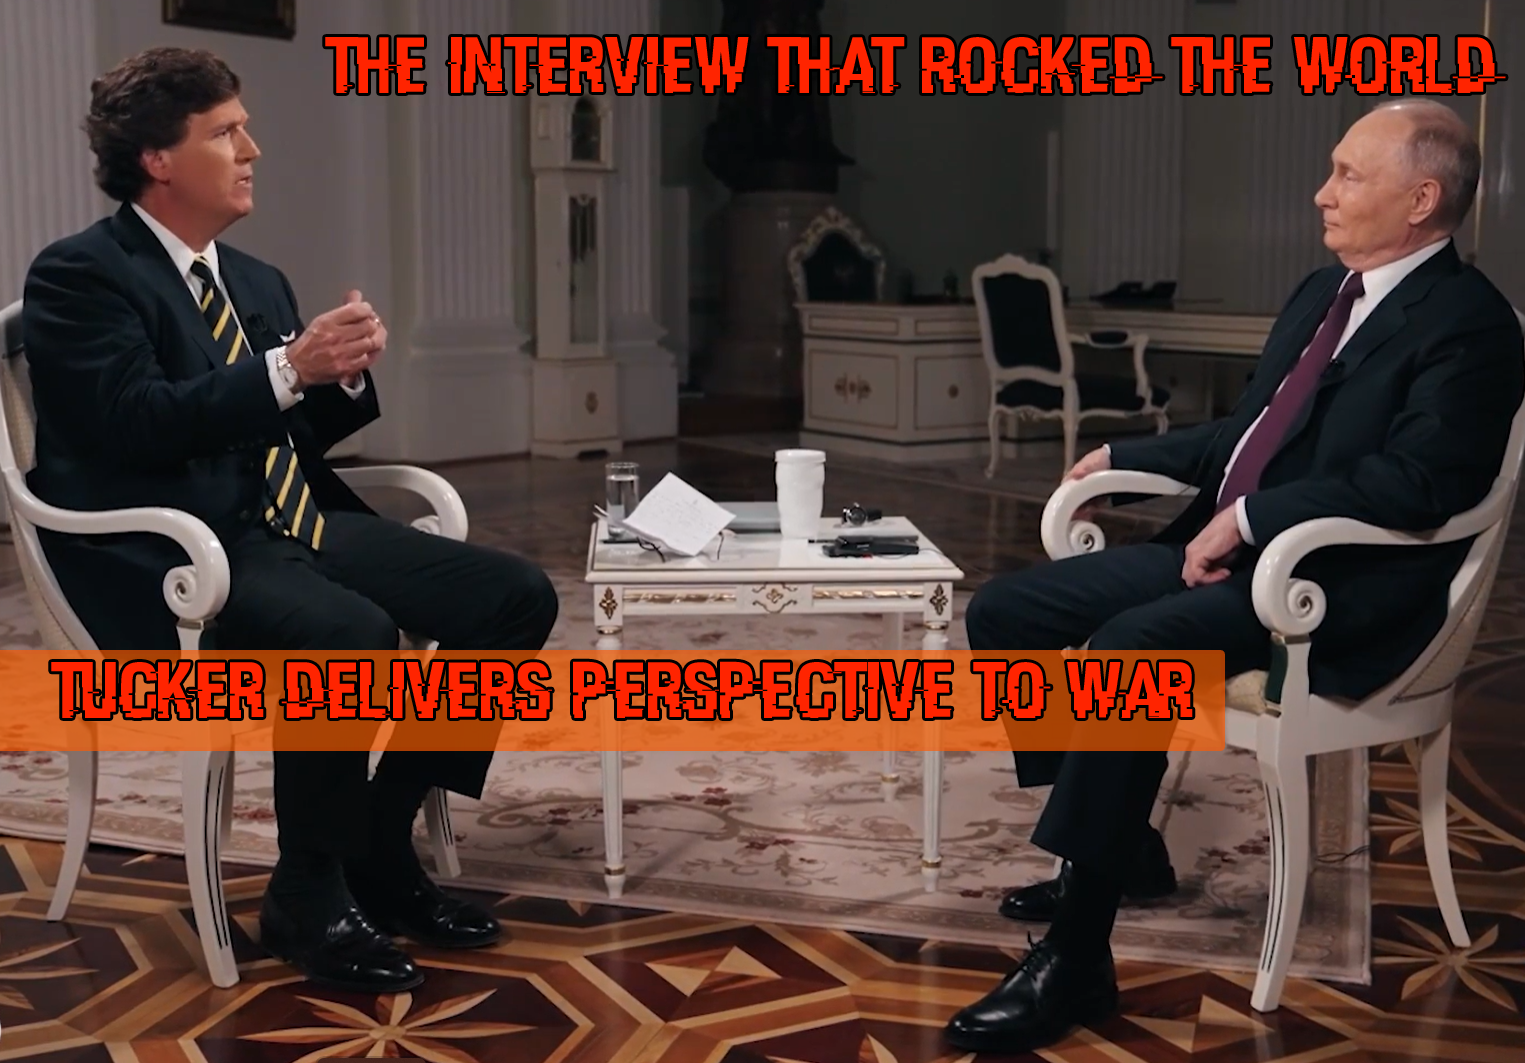 The Interview that shook the world.